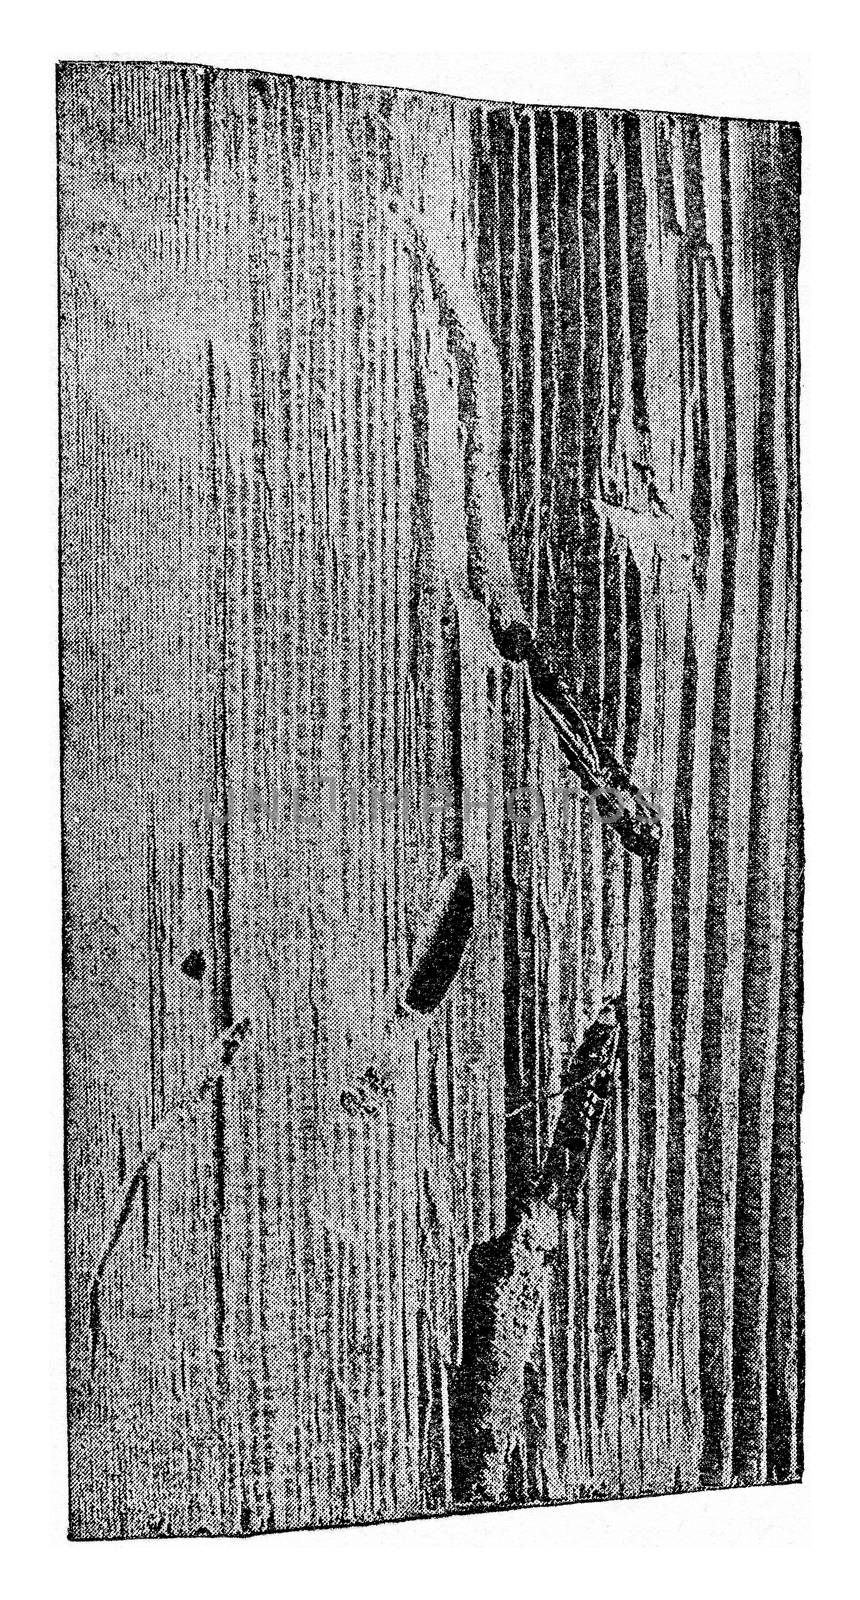 Fragment of a wooden throne of spruce age of about sixty, vintage engraved illustration.
